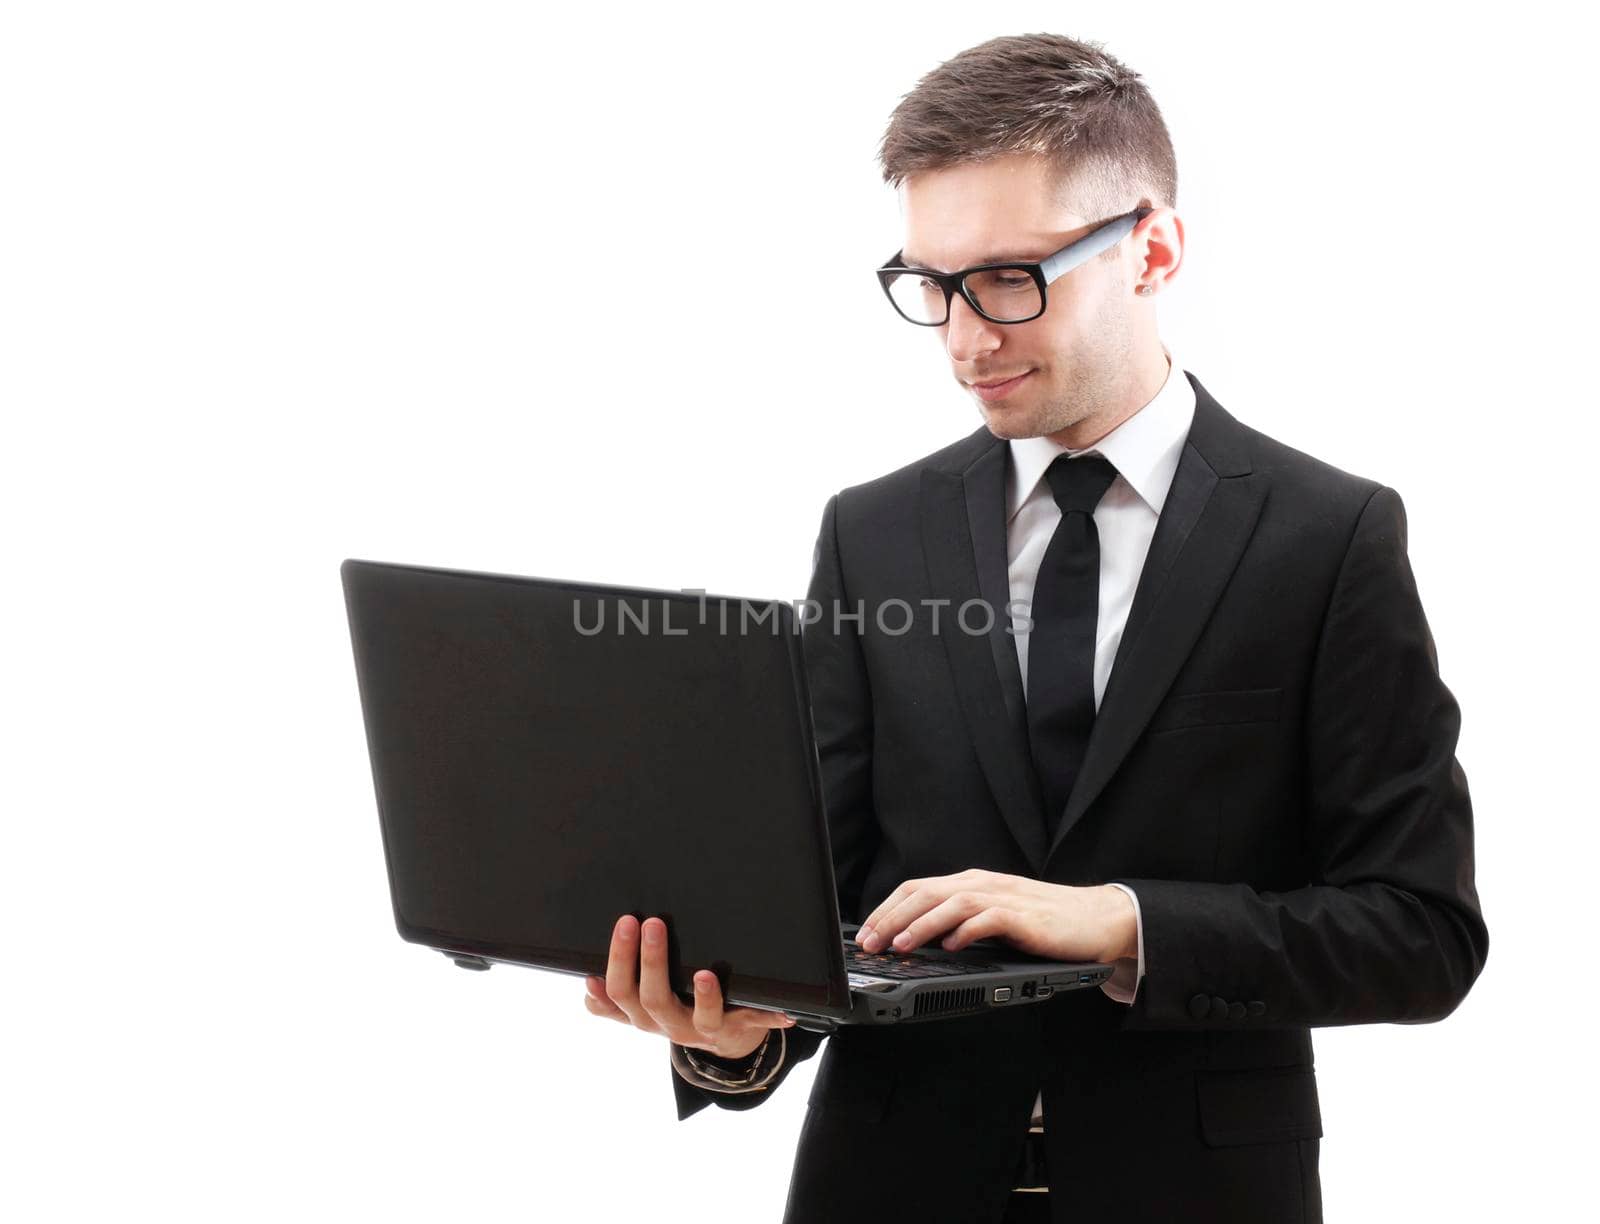 Businessman holding a laptop and smiling. Isolated against a white background.